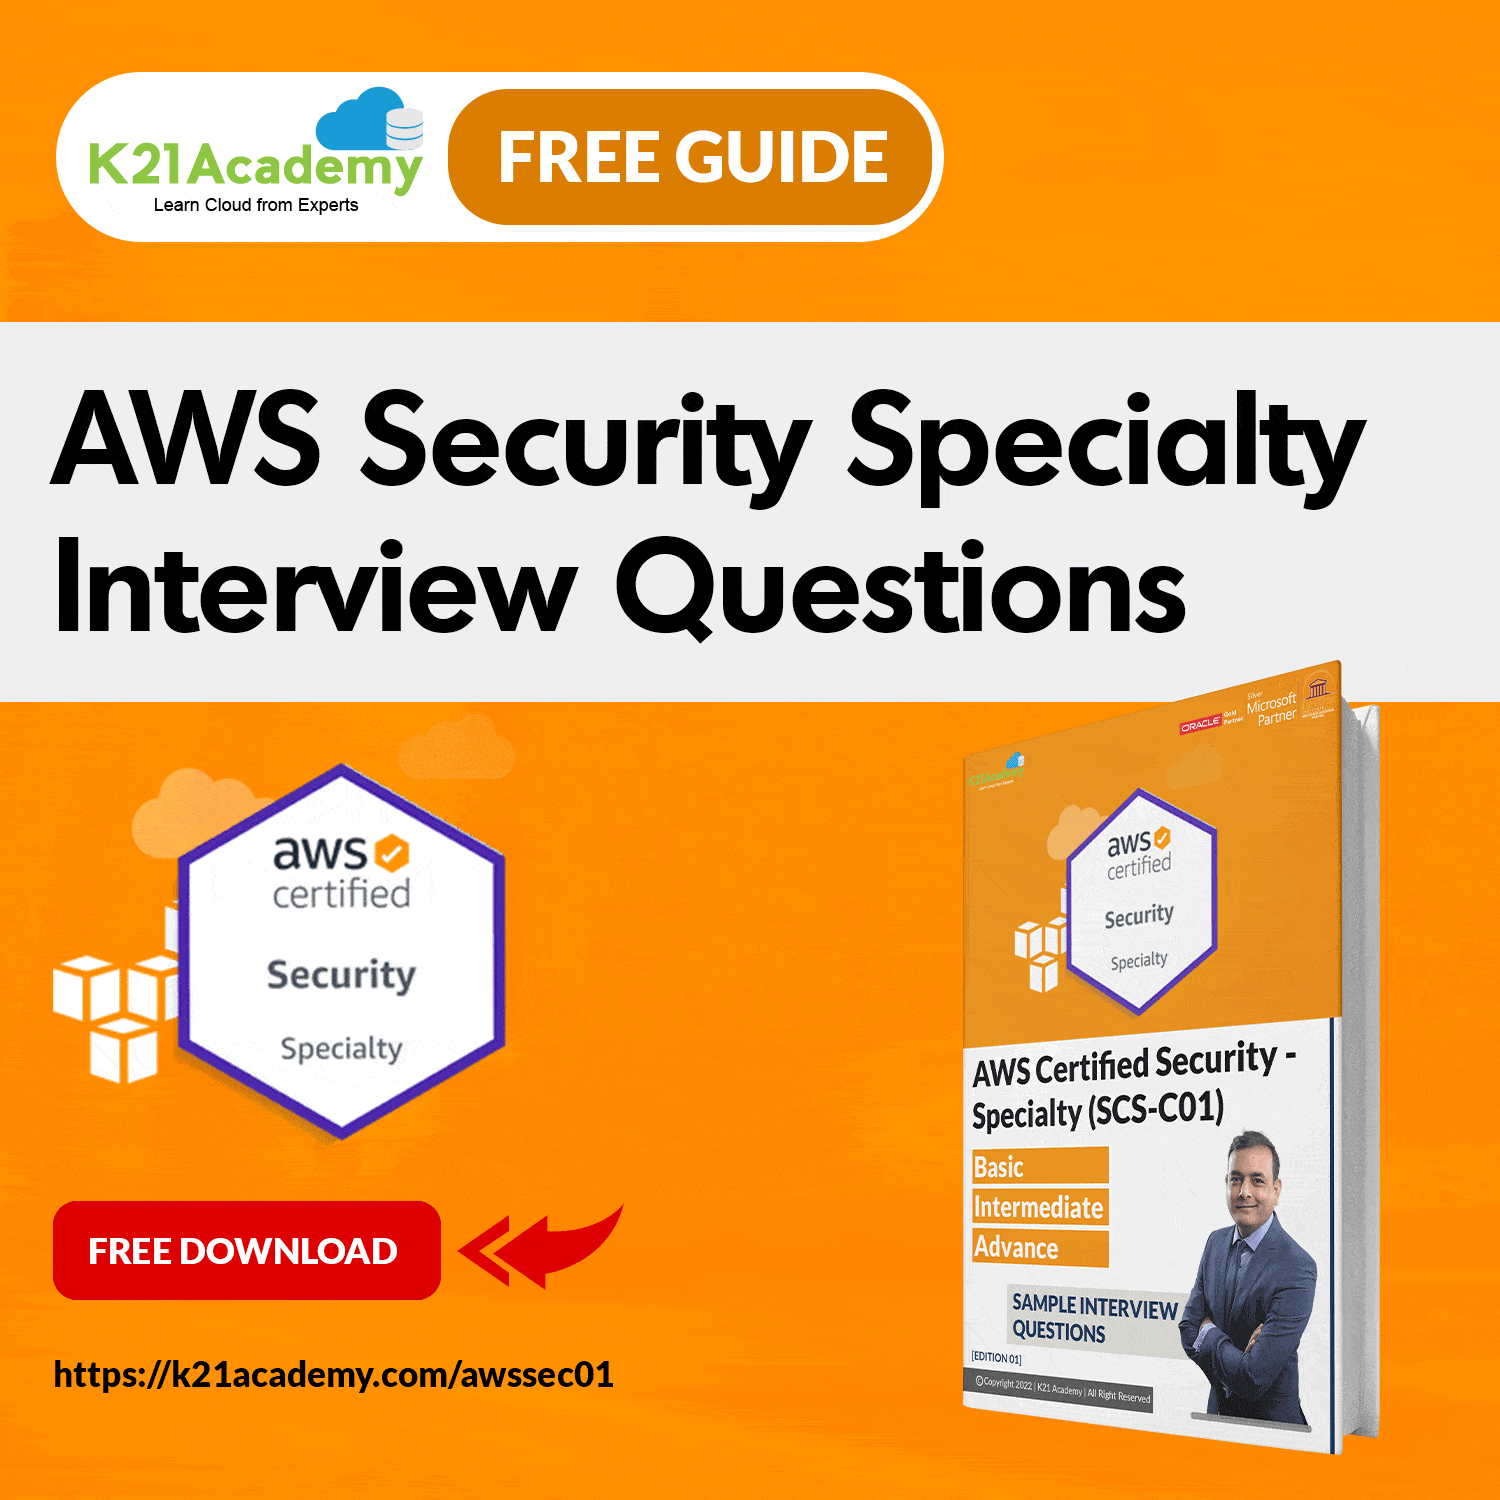 AWS Security IQ Guide Gif